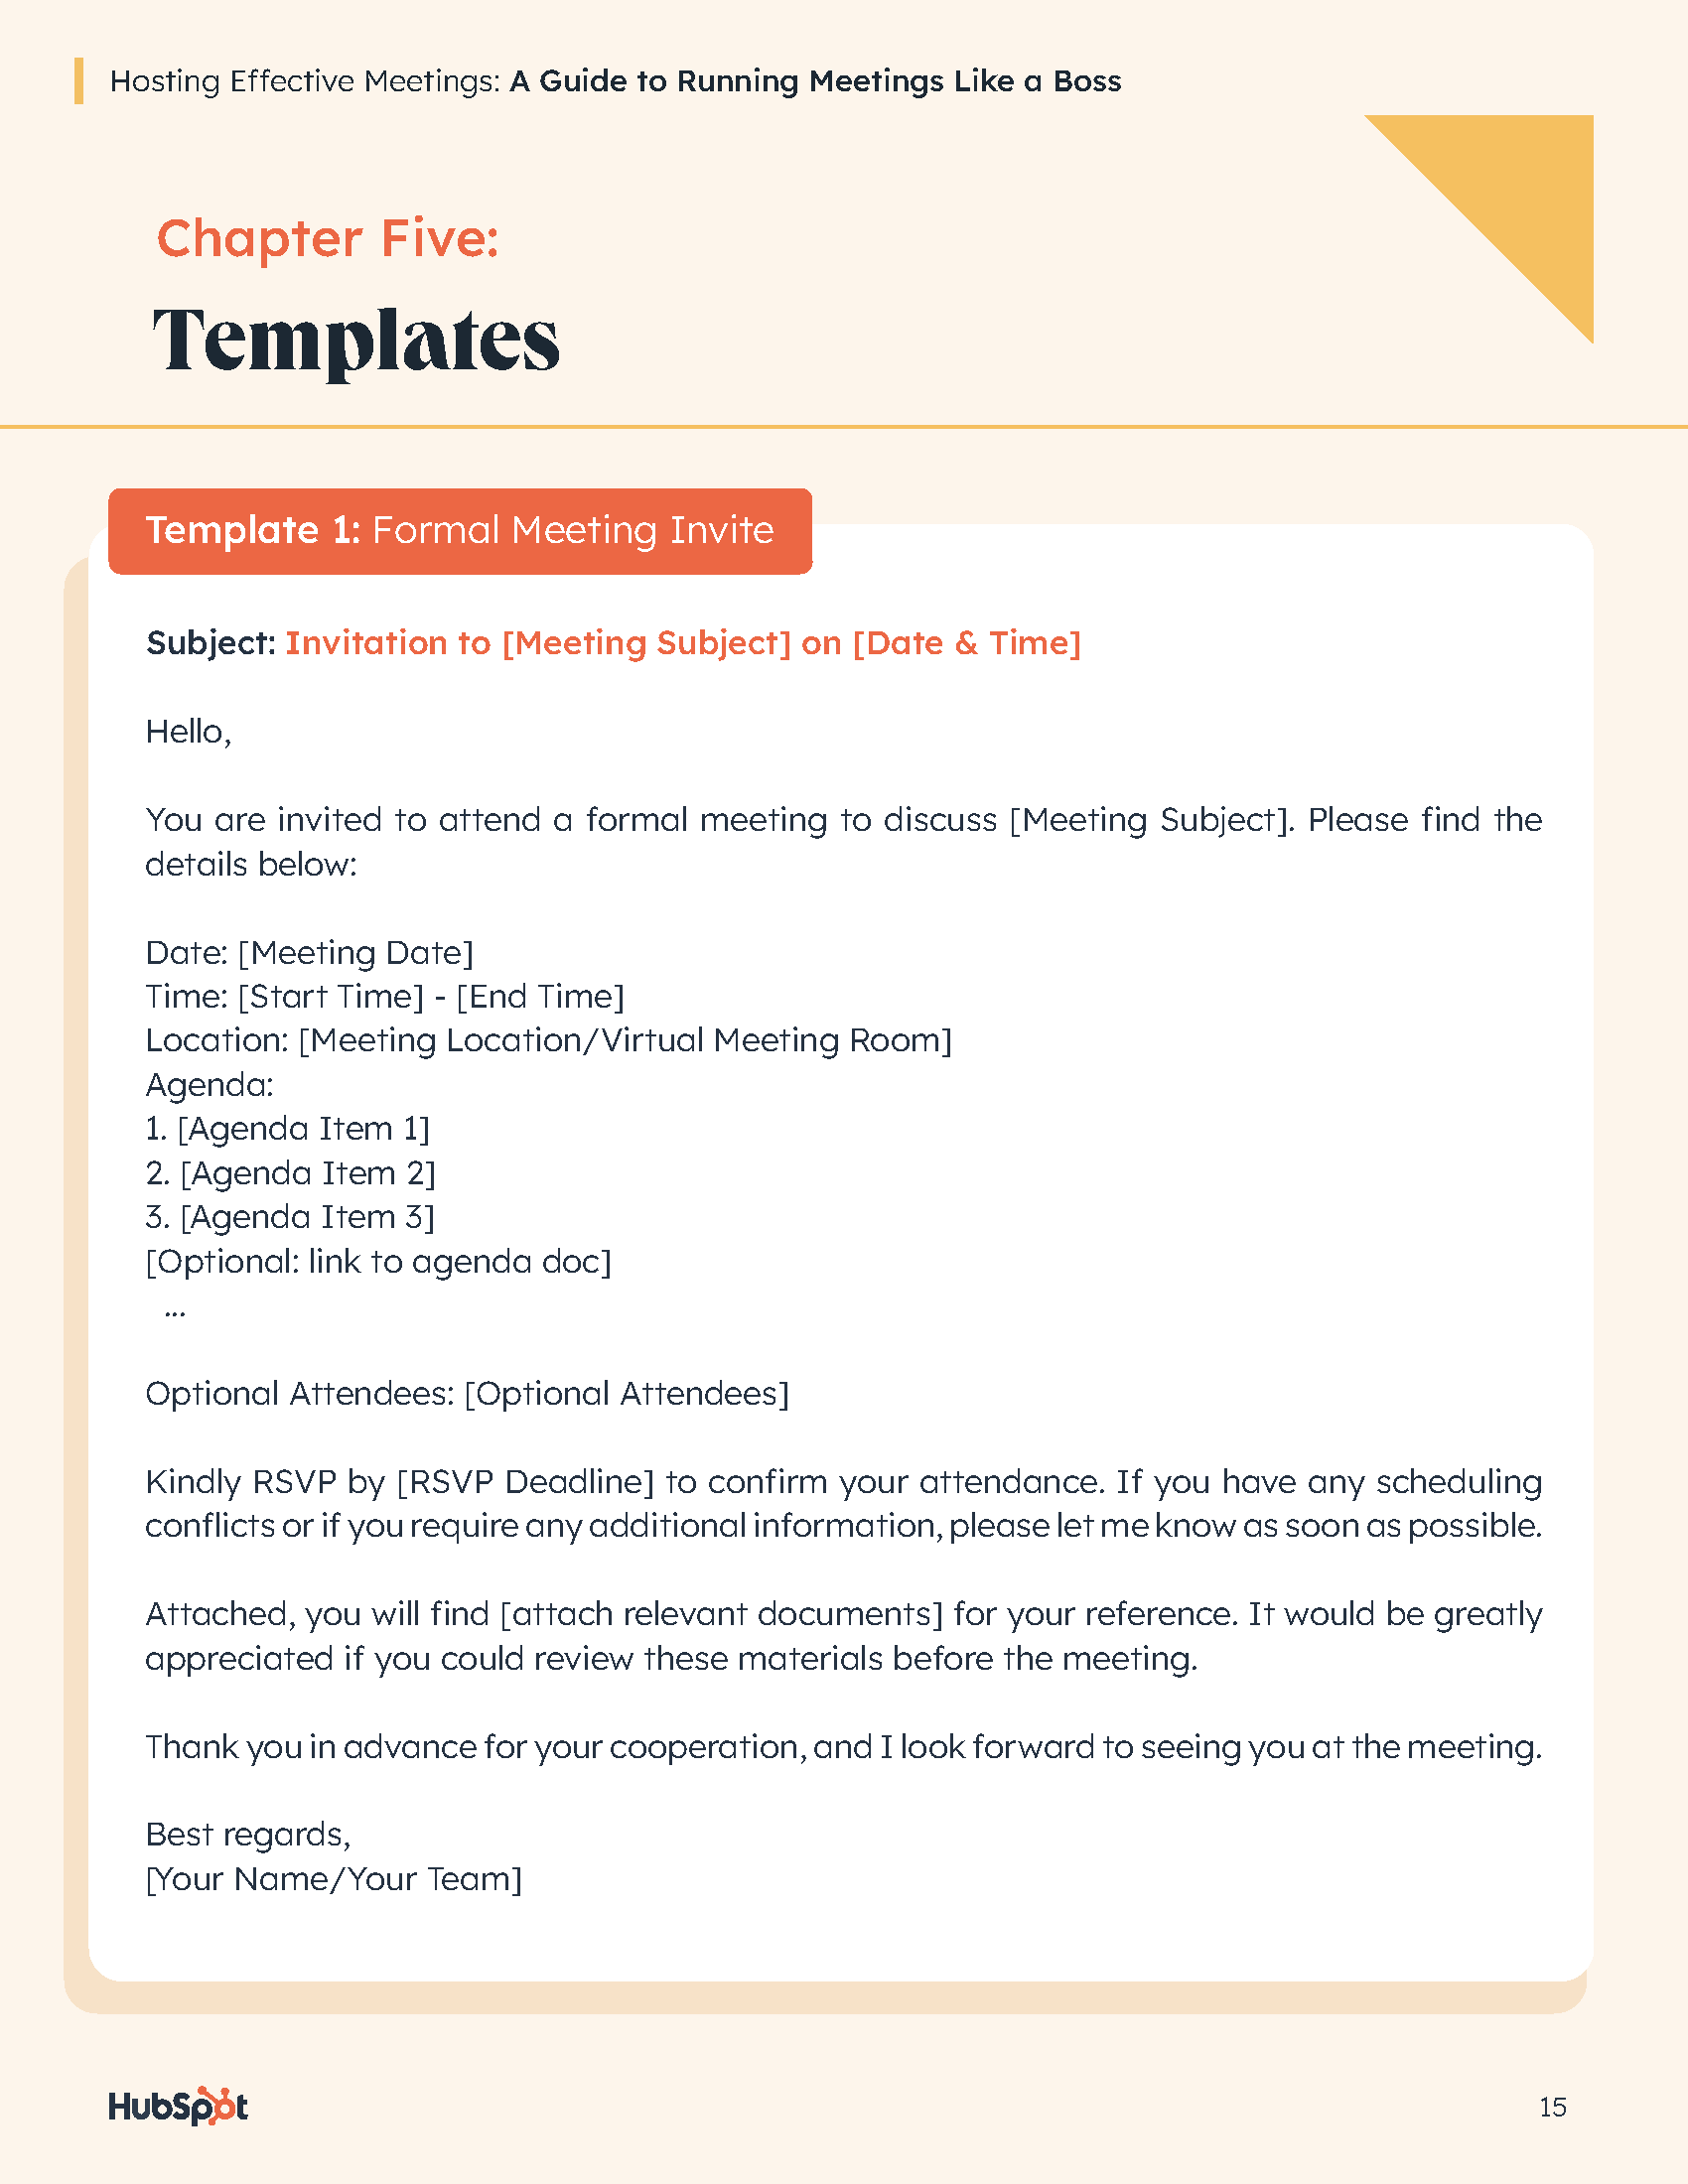 How to Run Effective Meetings_Page_15